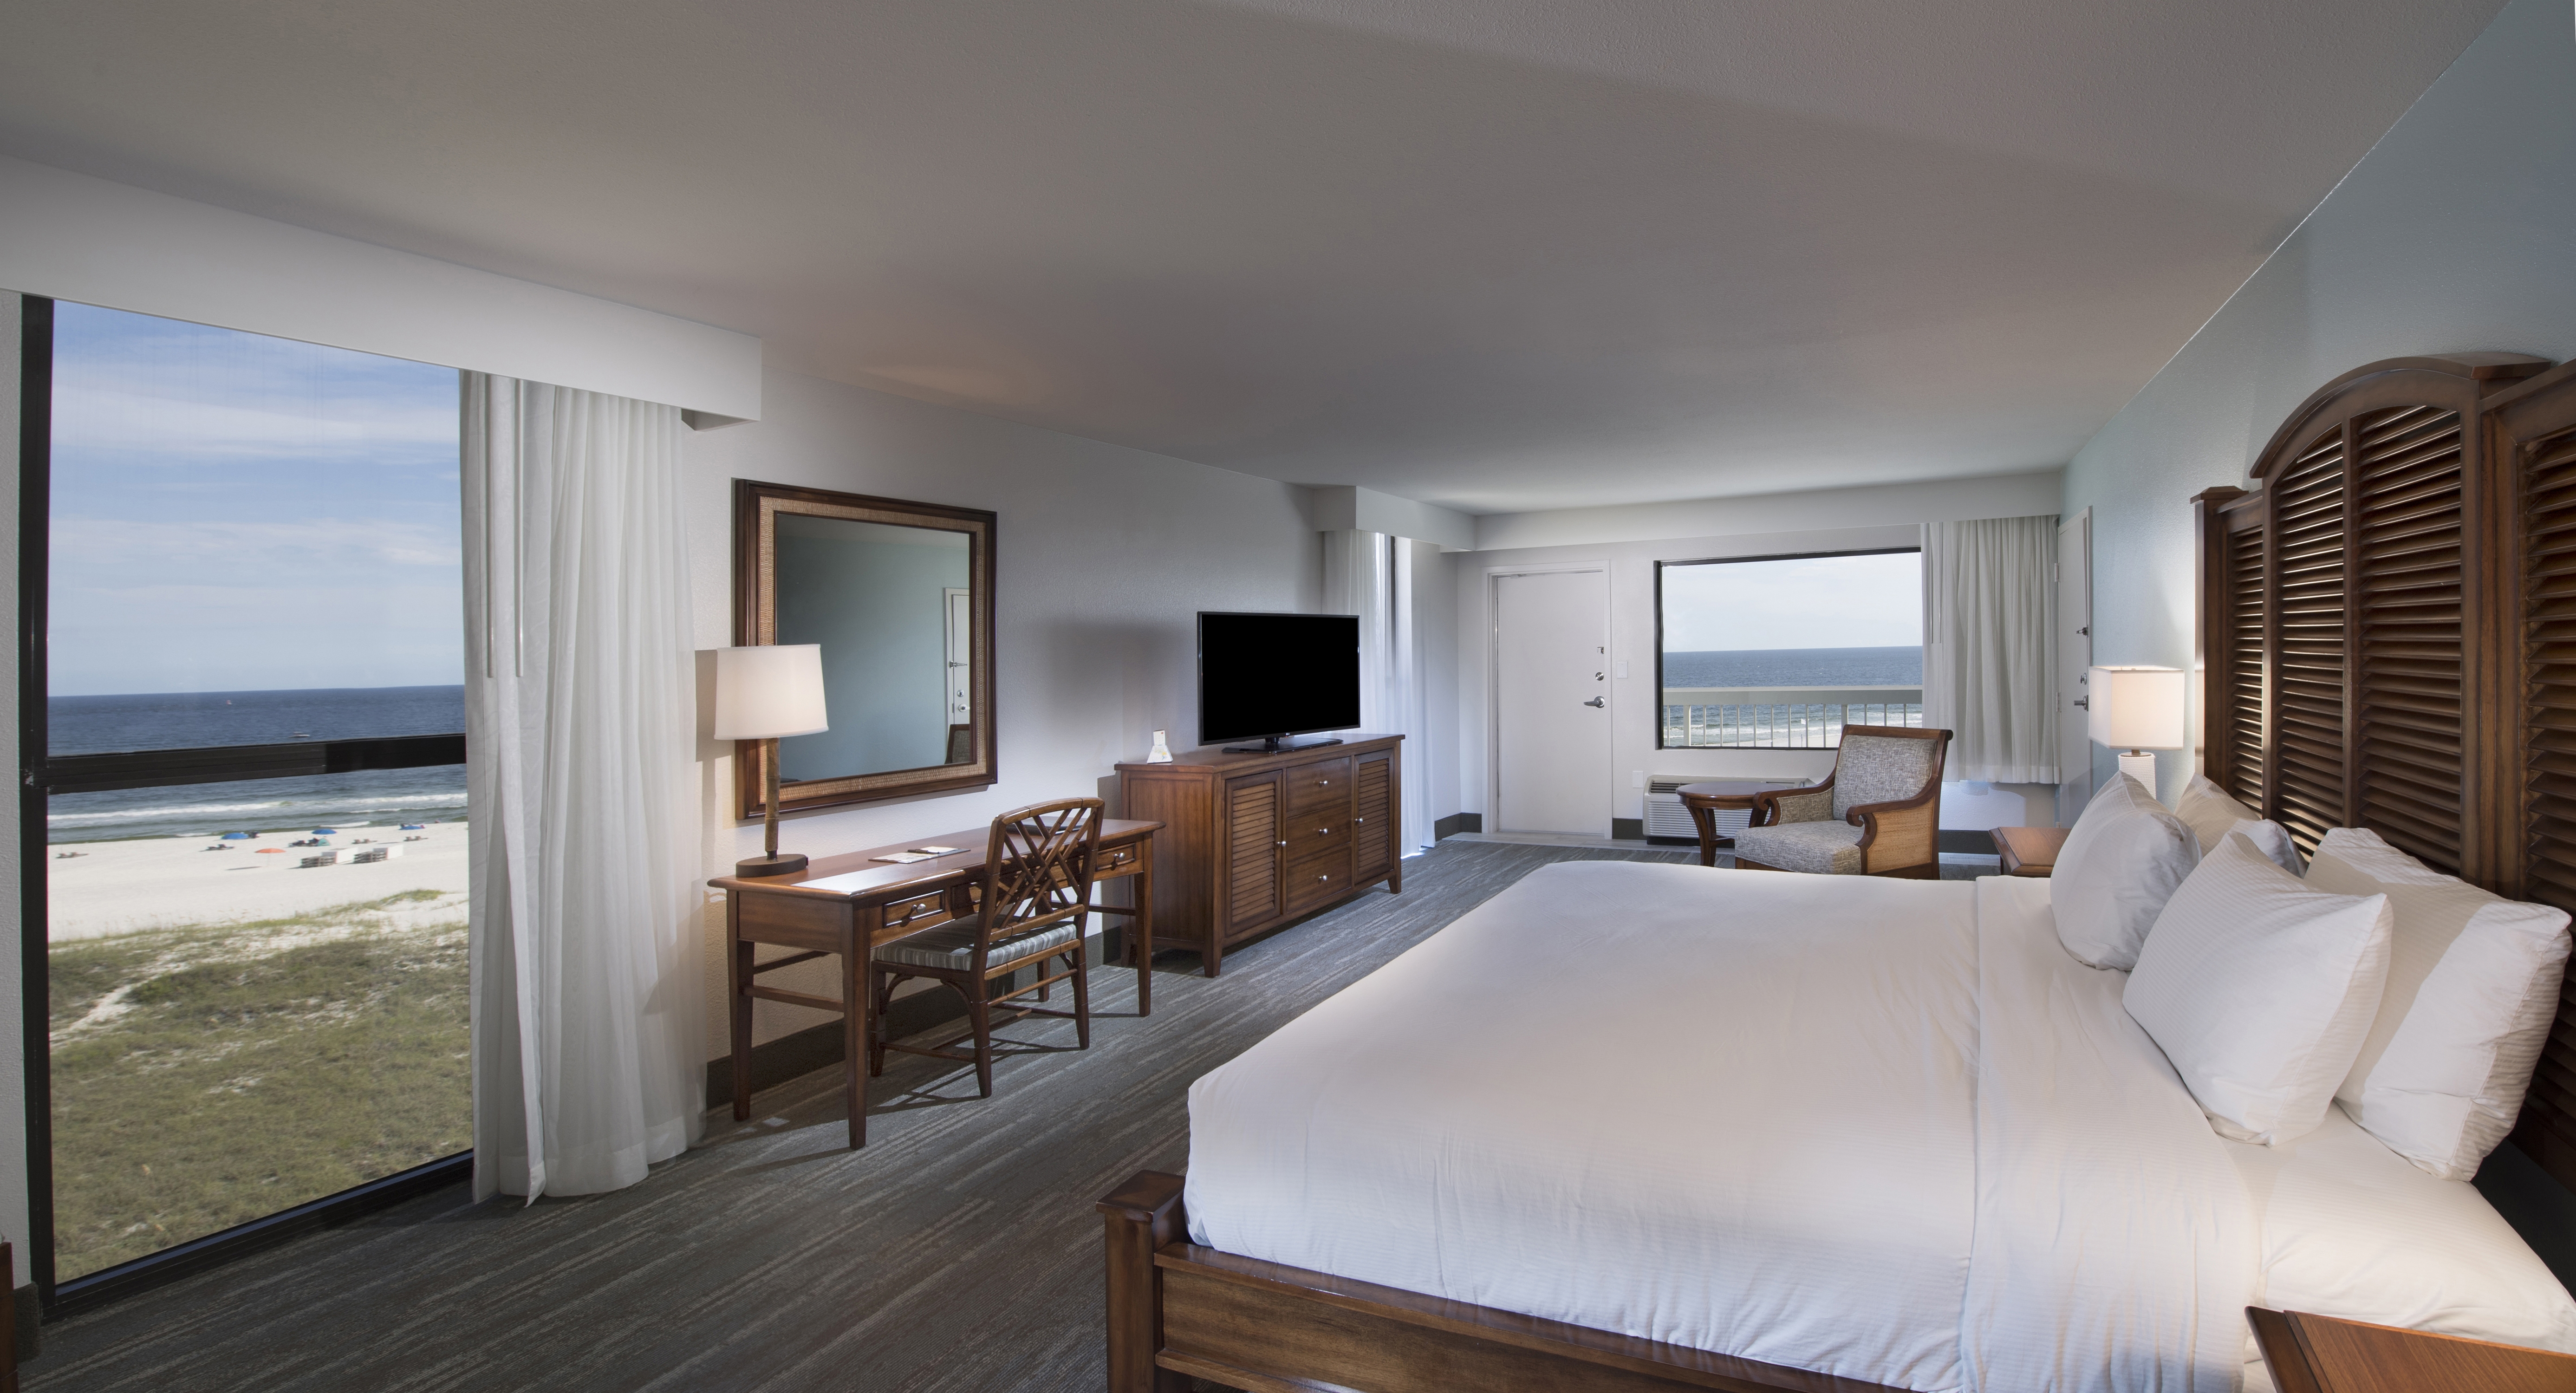 King Bed and Bedside Tables Facing Beach View, TV and Work Desk with Reading Chair in Corner by Window